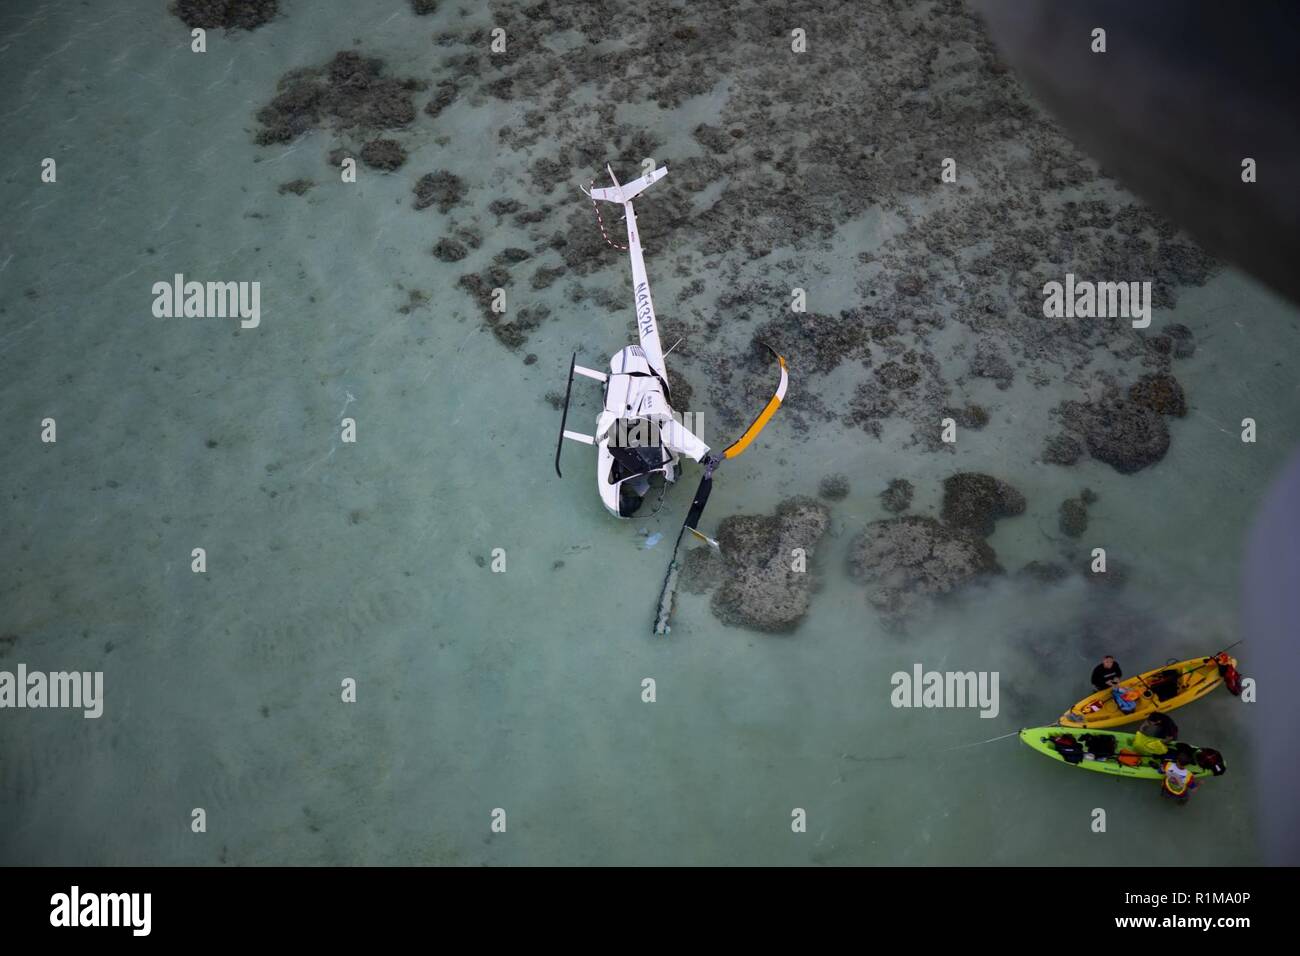 A CH-53E Super Stallion with Marine Heavy Helicopter Squadron 463, Marine Aircraft Group 24, provides on scene awareness for a downed civilian helicopter that made an emergency landing on the sandbar in Kaneohe Bay, Hawaii, Oct. 22, 2018. The helicopters were in the area conducting routine operations when notified by the Marine Corps Air Station Kaneohe Air Traffic Control Tower that a civilian aircraft had fallen off of their radar. Marine Corps Base Hawaii also launched watercraft to assist with the rescue if needed. U.S. Marines in Hawaii stand ready to respond during any time of crisis; fr Stock Photo